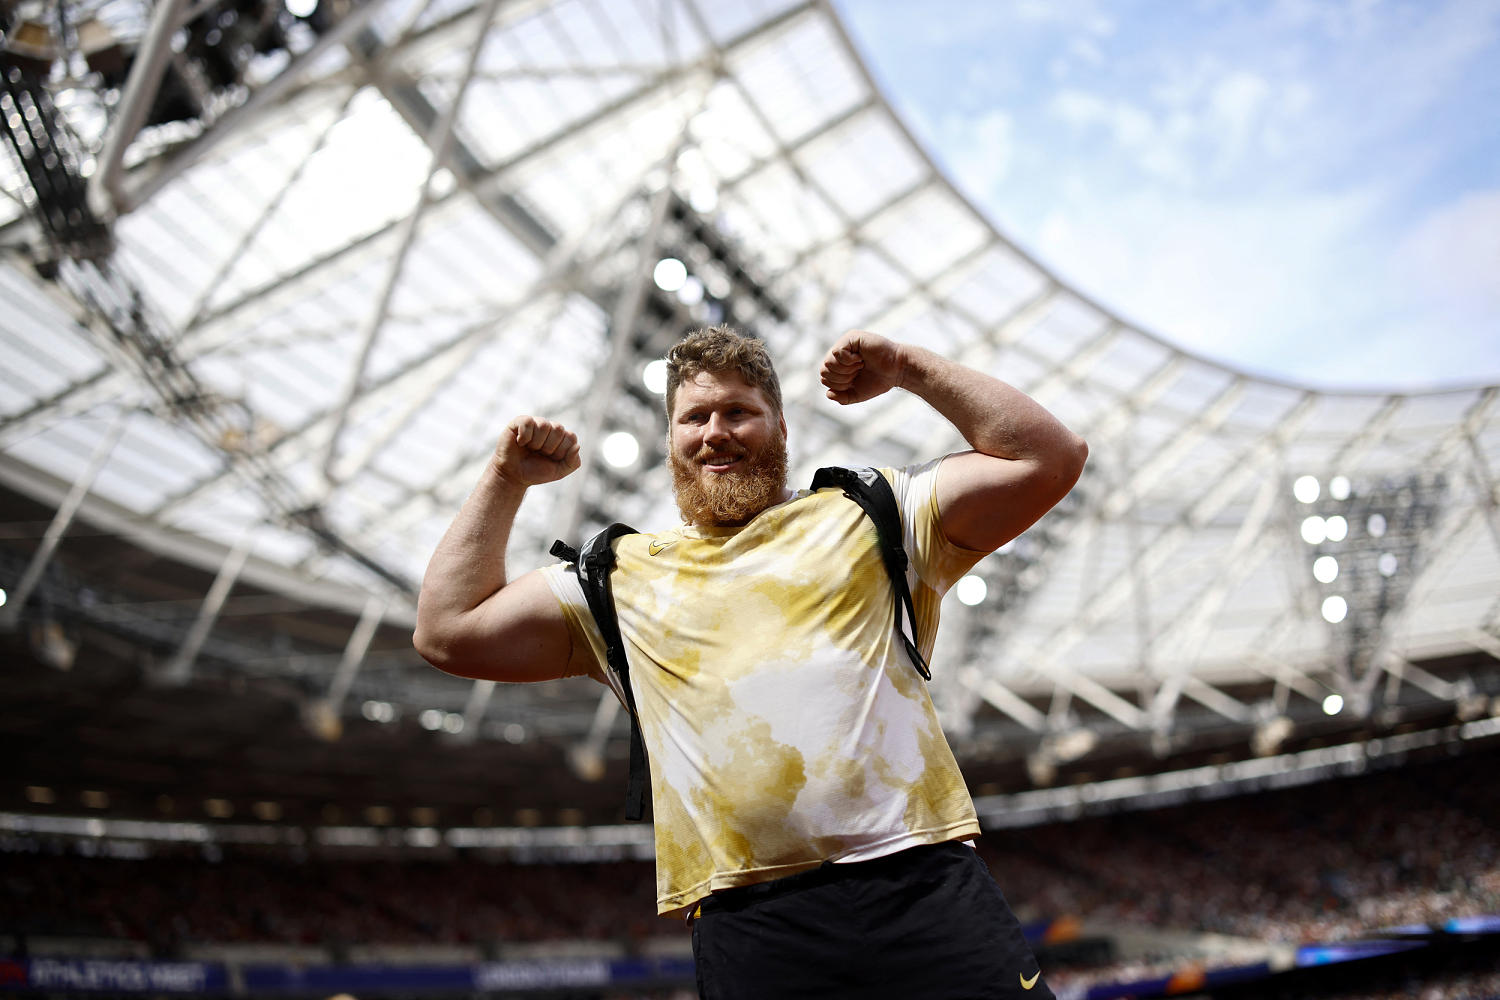 The most dominant shot putter in history eyes a third straight gold – if his body holds up